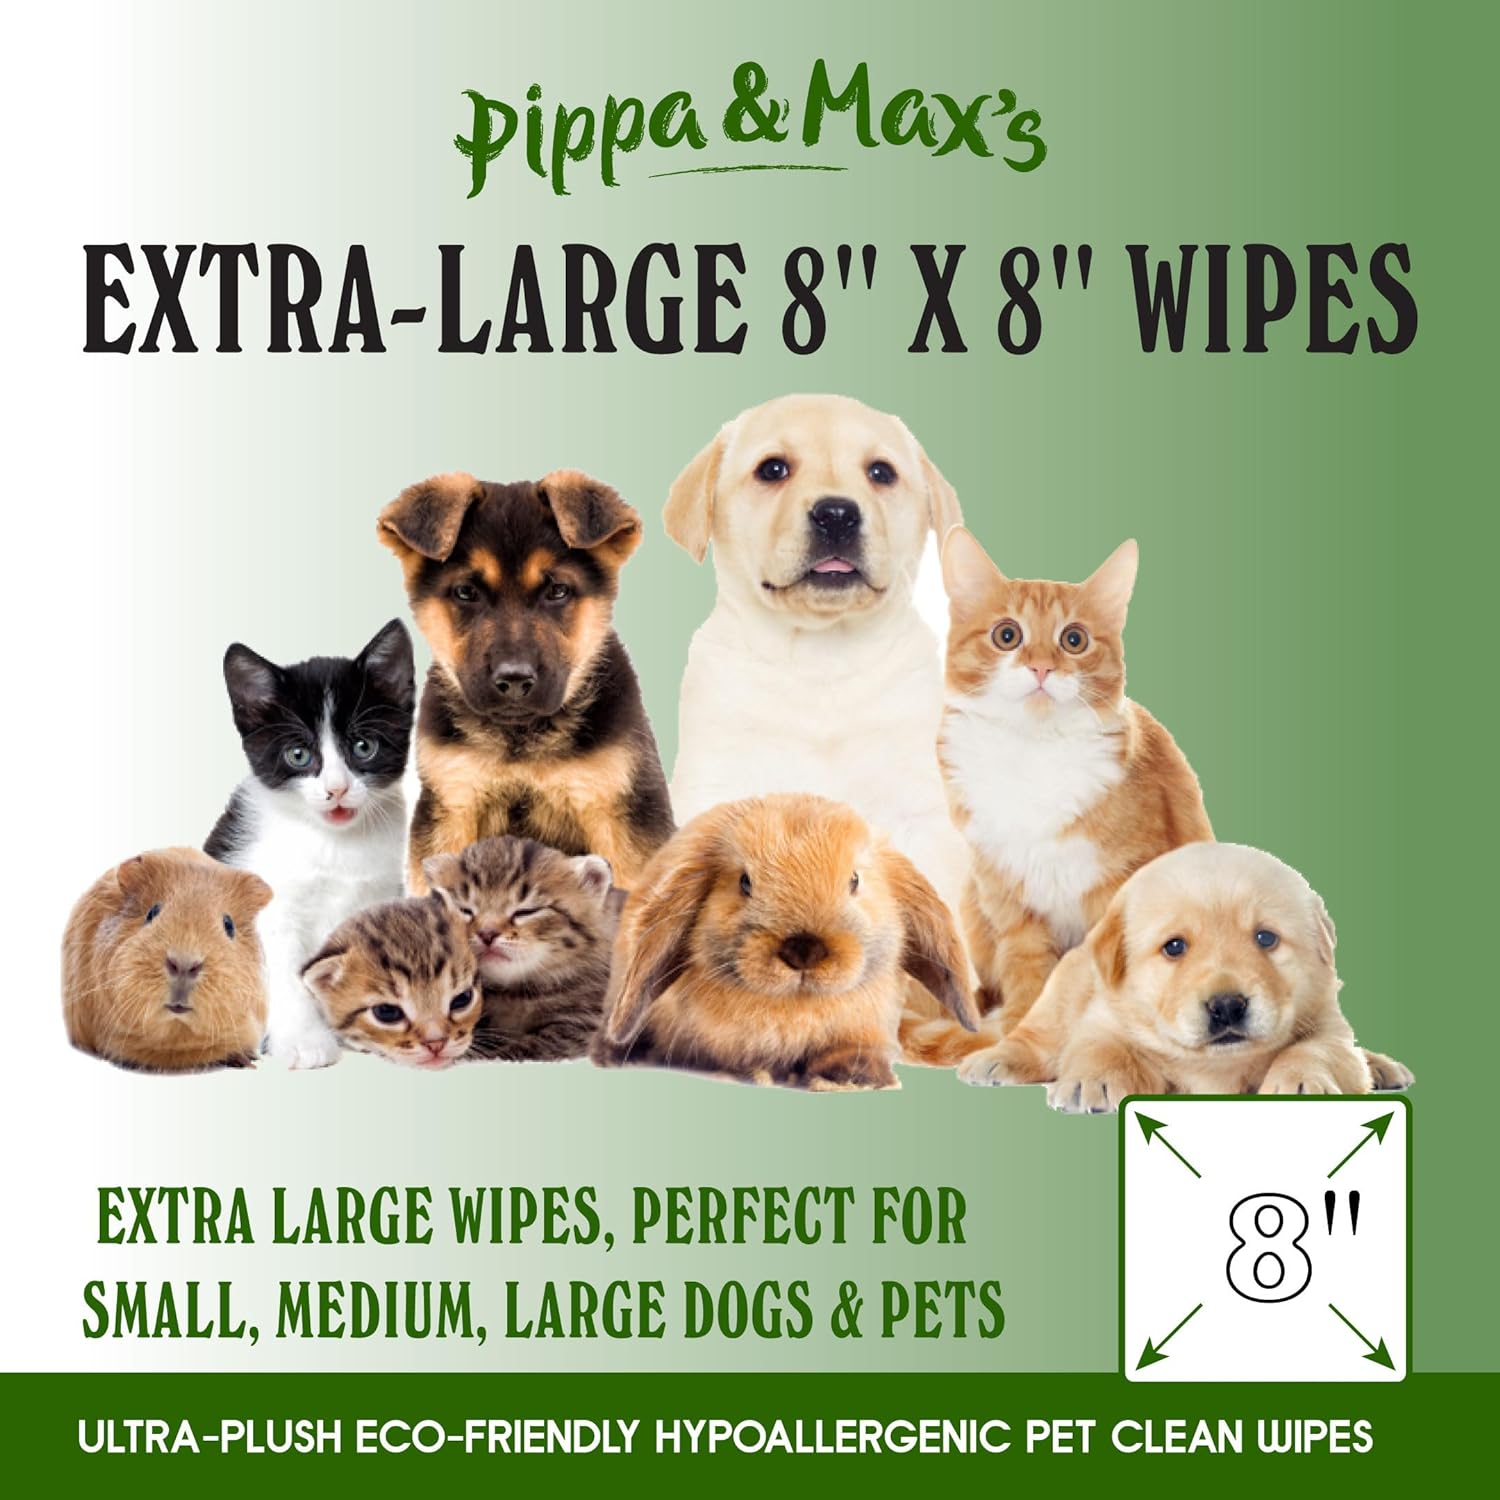 Pippa & Max Compostable Dog Wipes - Biodegradable Pet Wipes for Full Body, Eyes, Ears, Bum & Paws - 200 Sensitive Grooming Wipes for Dogs, Puppies & Cats (Fragrance-Free)